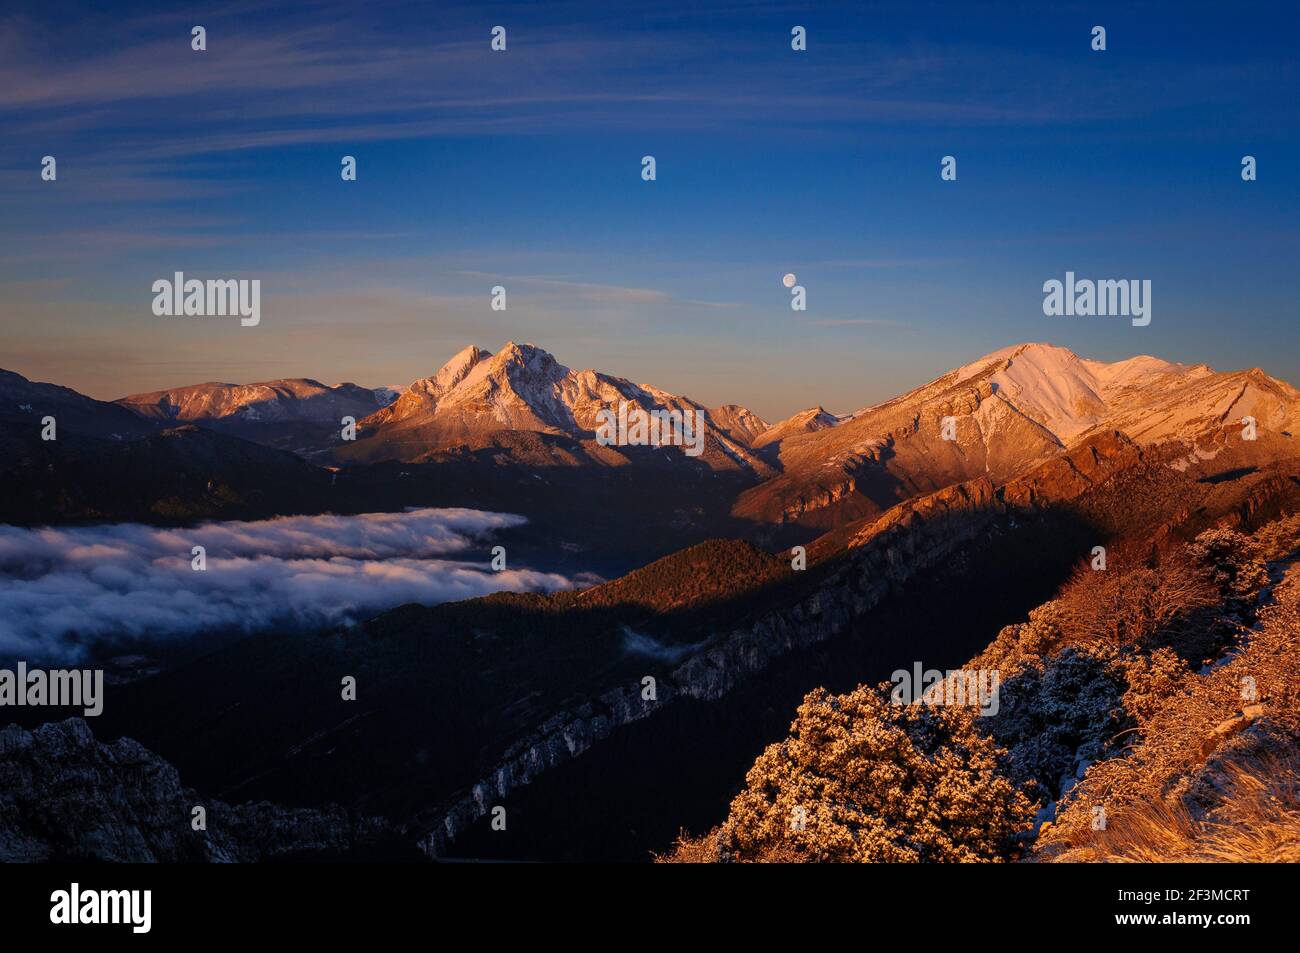 Sunrise at Pedraforca and Alt Berguedà region with Full Moon, viewed from Coll de Pal viewpoint (Berguedà, Catalonia, Spain, Pyrenees) Stock Photo